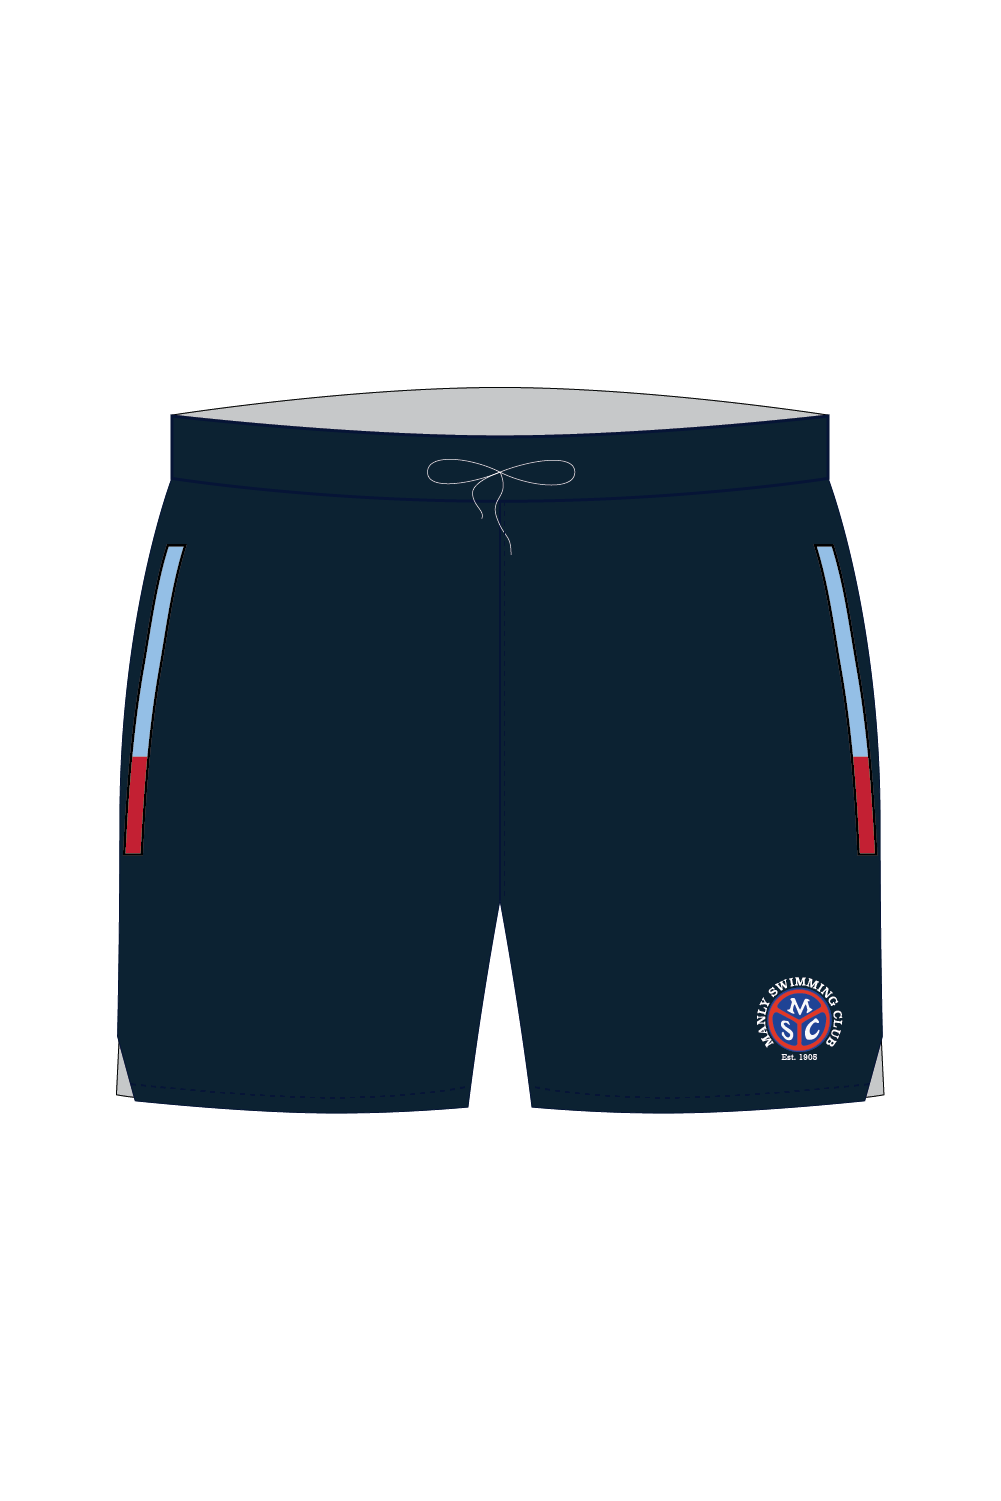 Manly Swimming Club Men's Shorts